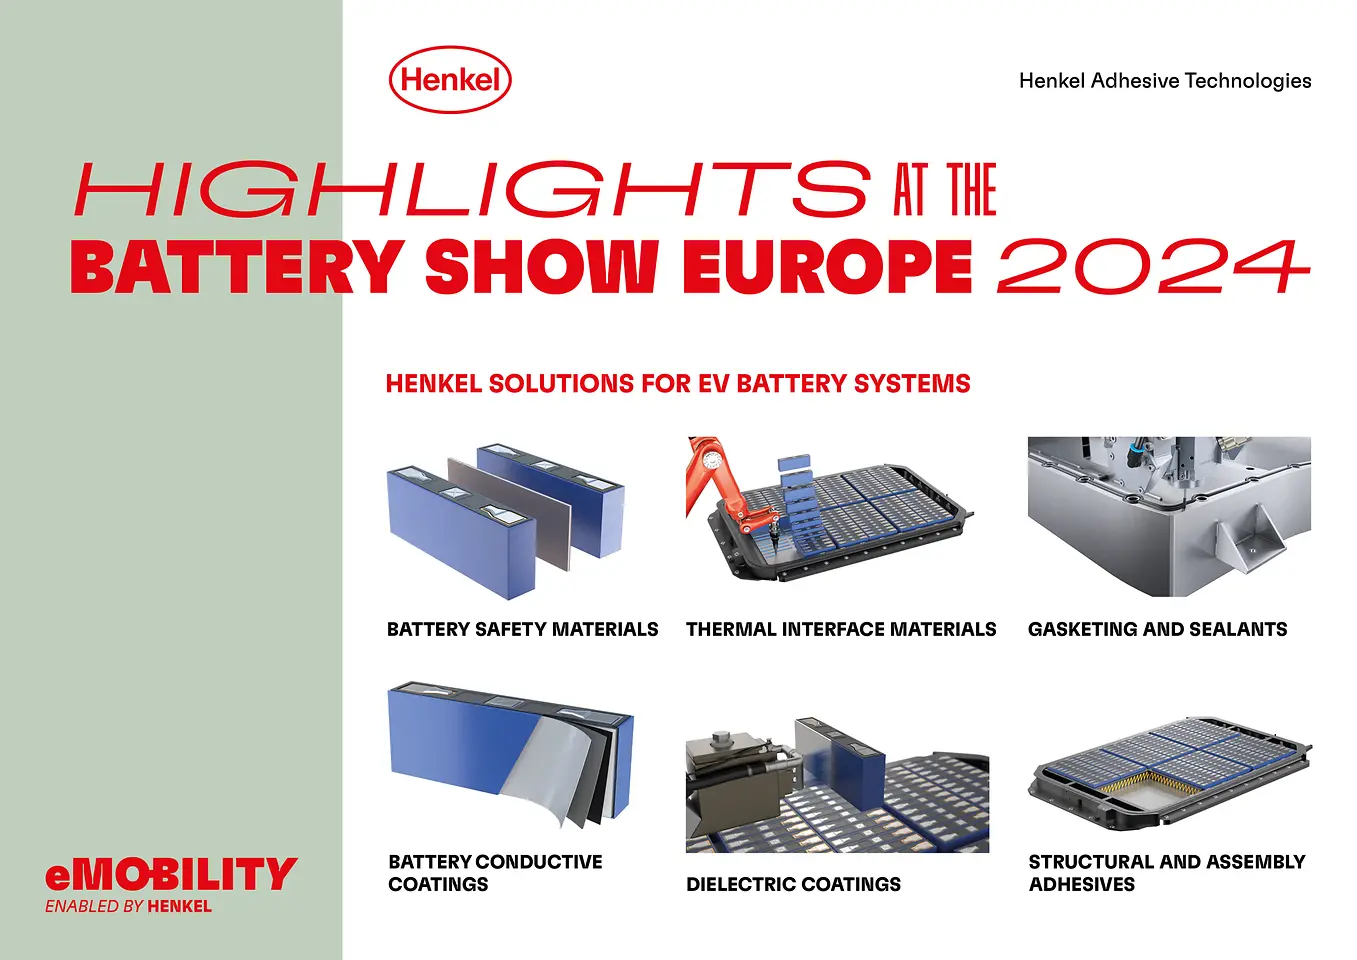 
Henkel applications at the Battery Show Europe 2024